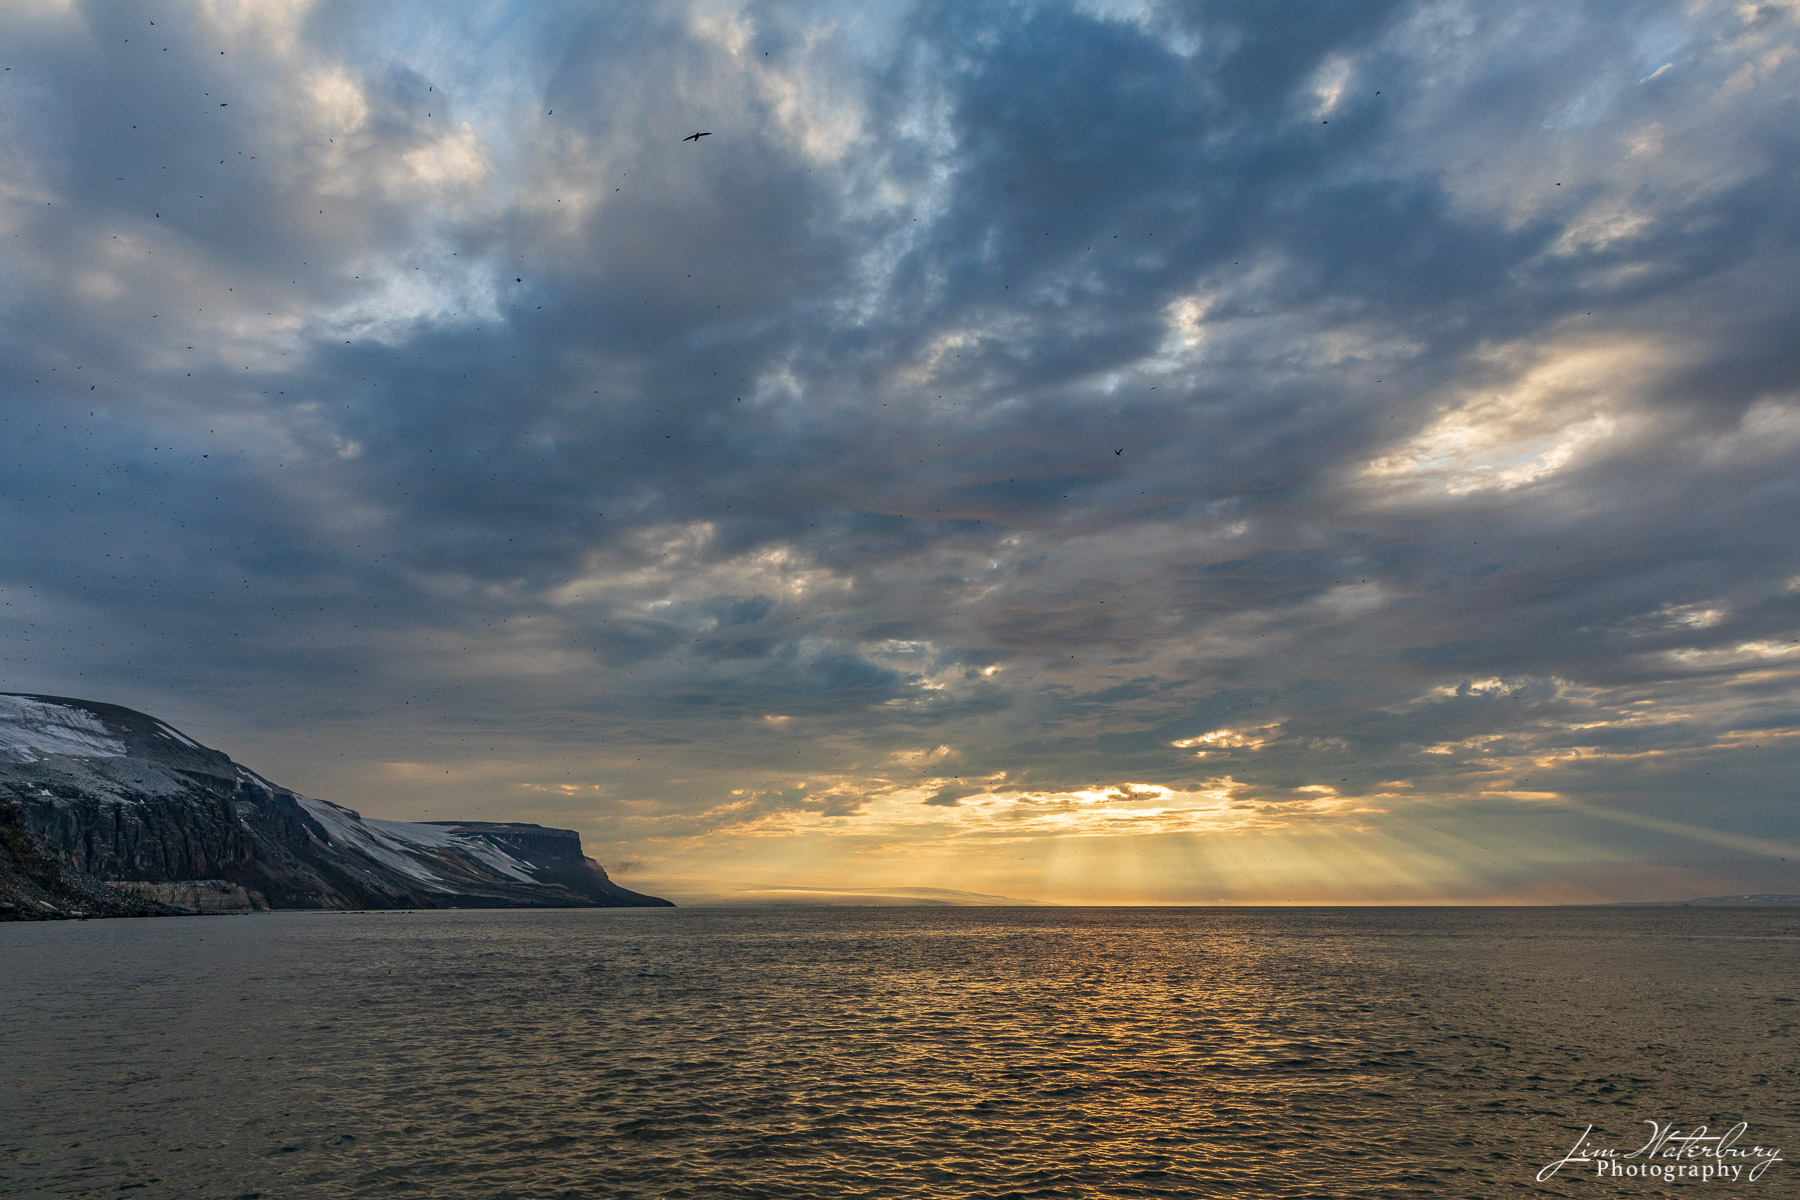 Sun, hidden by clouds,  casts its rays on the strait near the Alkefjellet bird cliff, Svalbard, Norway.  The Hinlopen Strait...